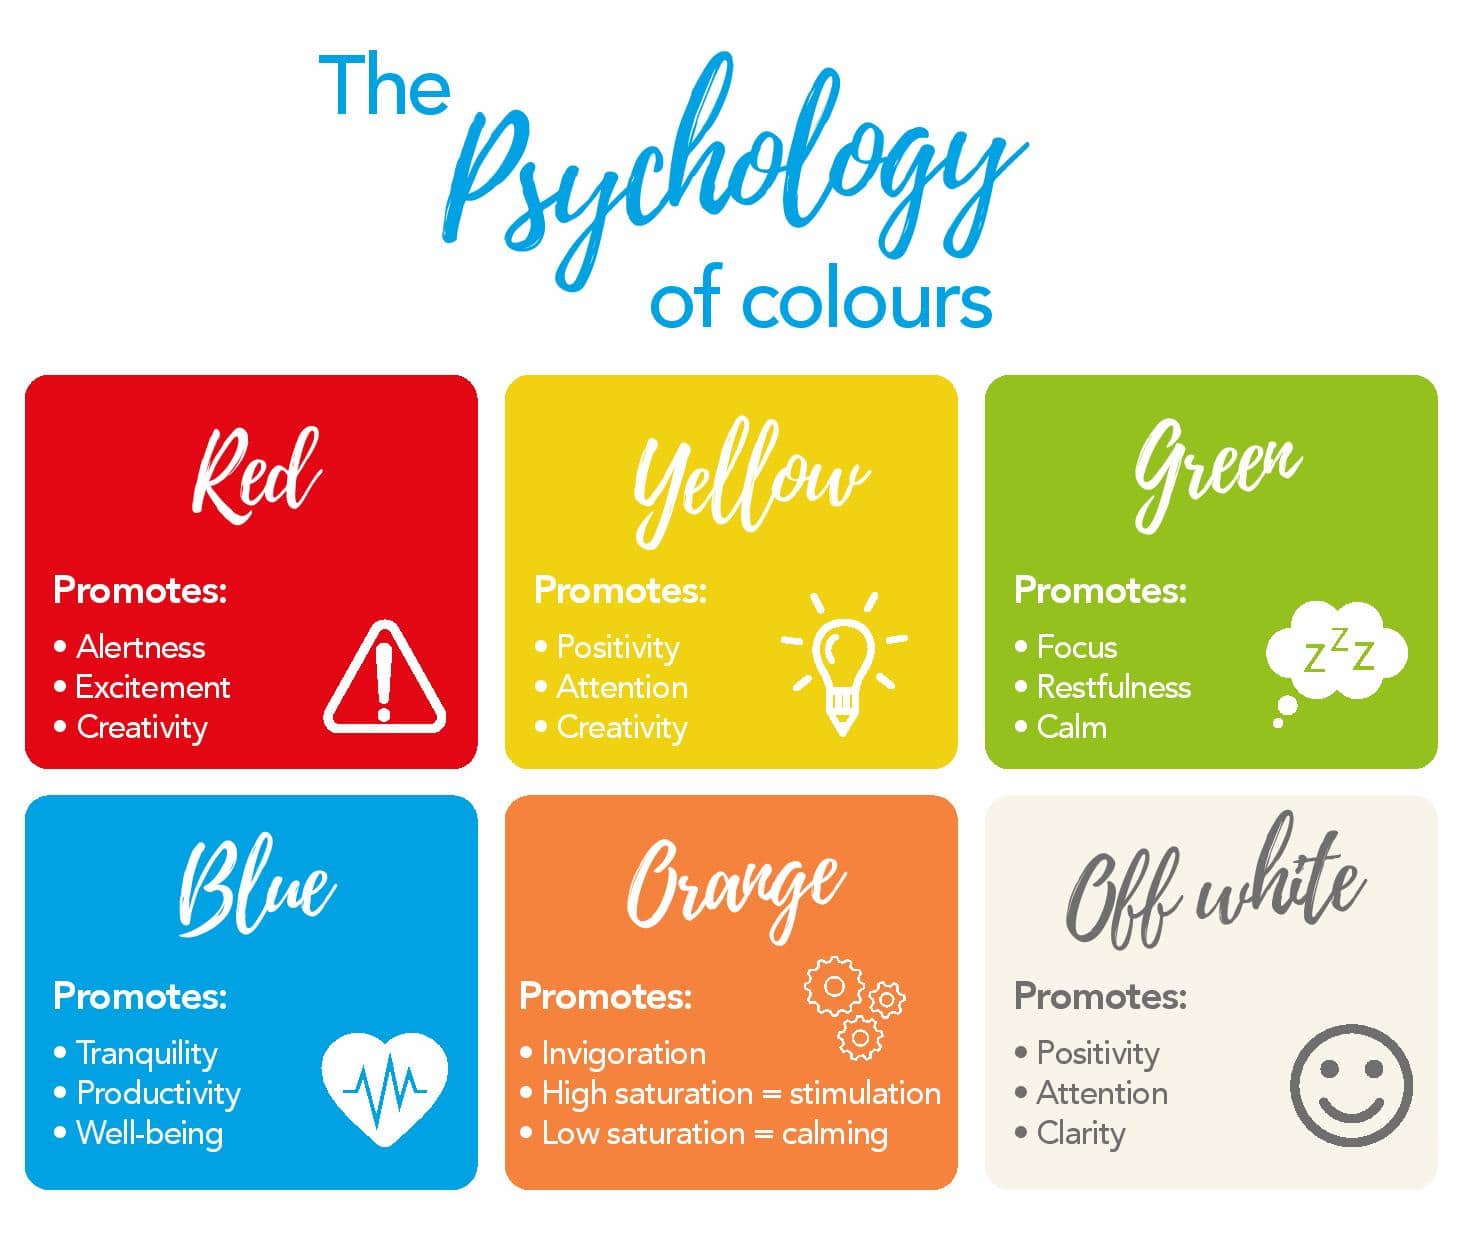 colors for learning